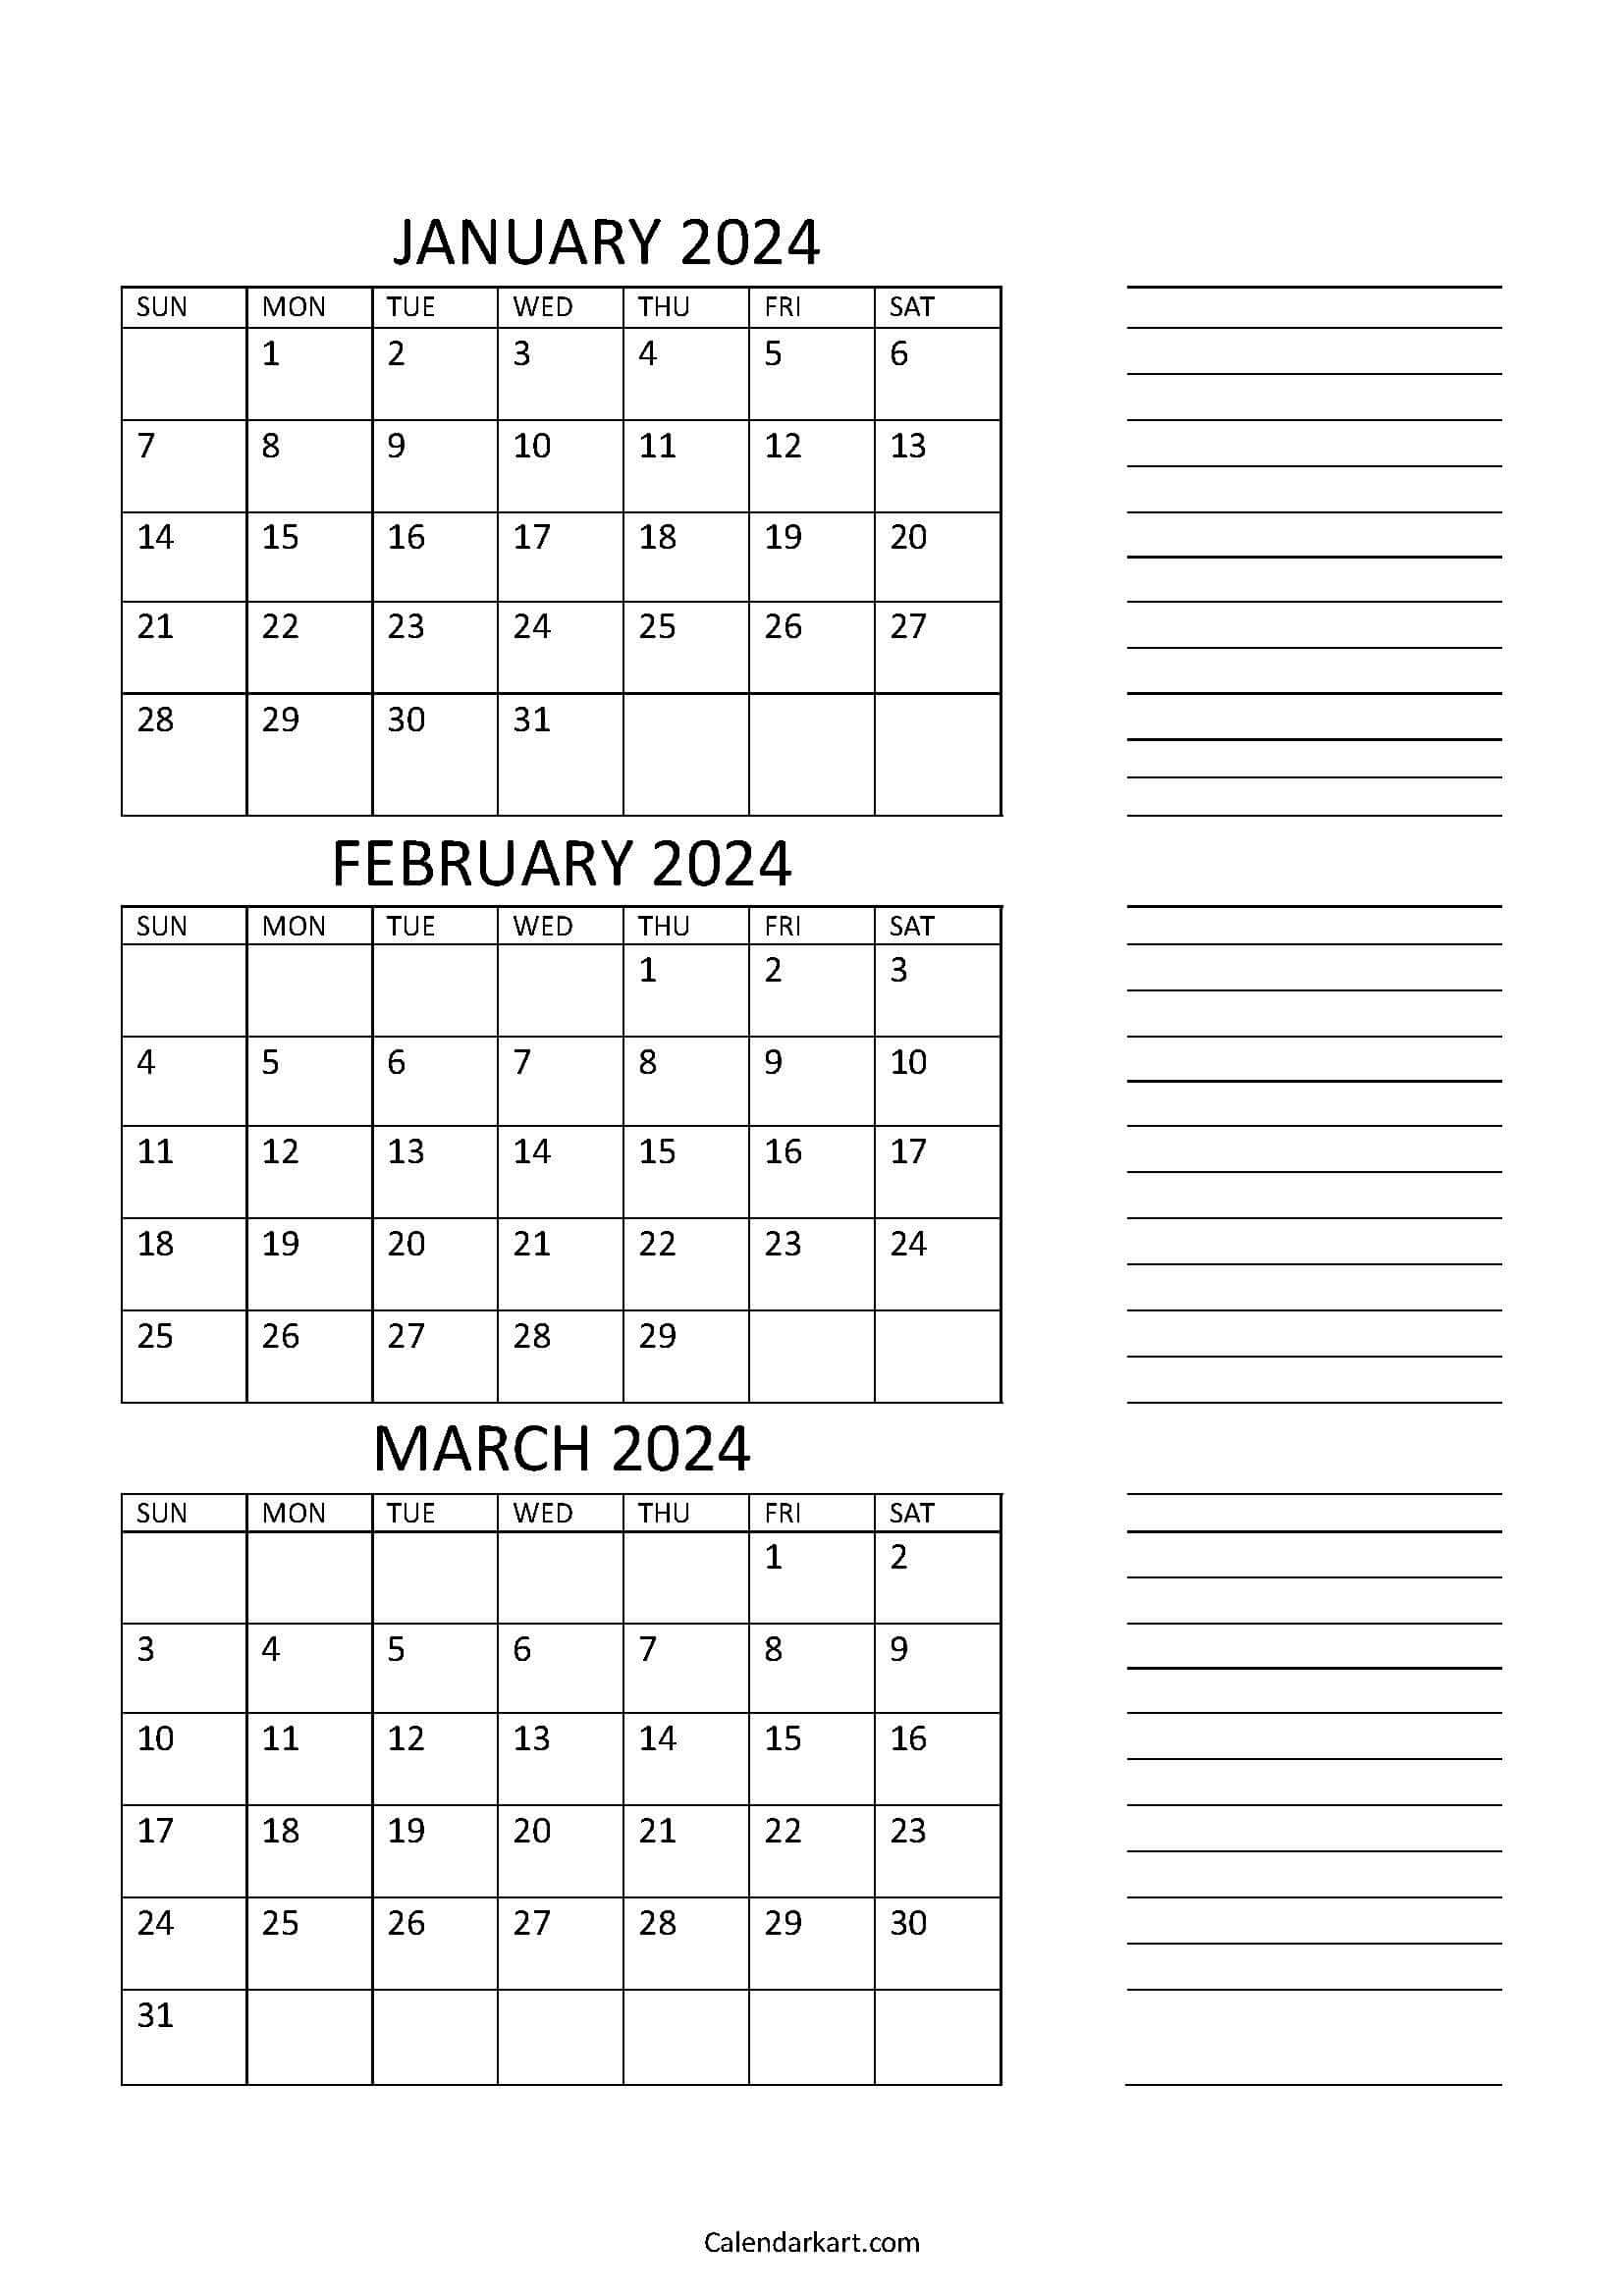 Free Printable January To March 2024 Calendar - Calendarkart | Printable Calendar 2024 January February March